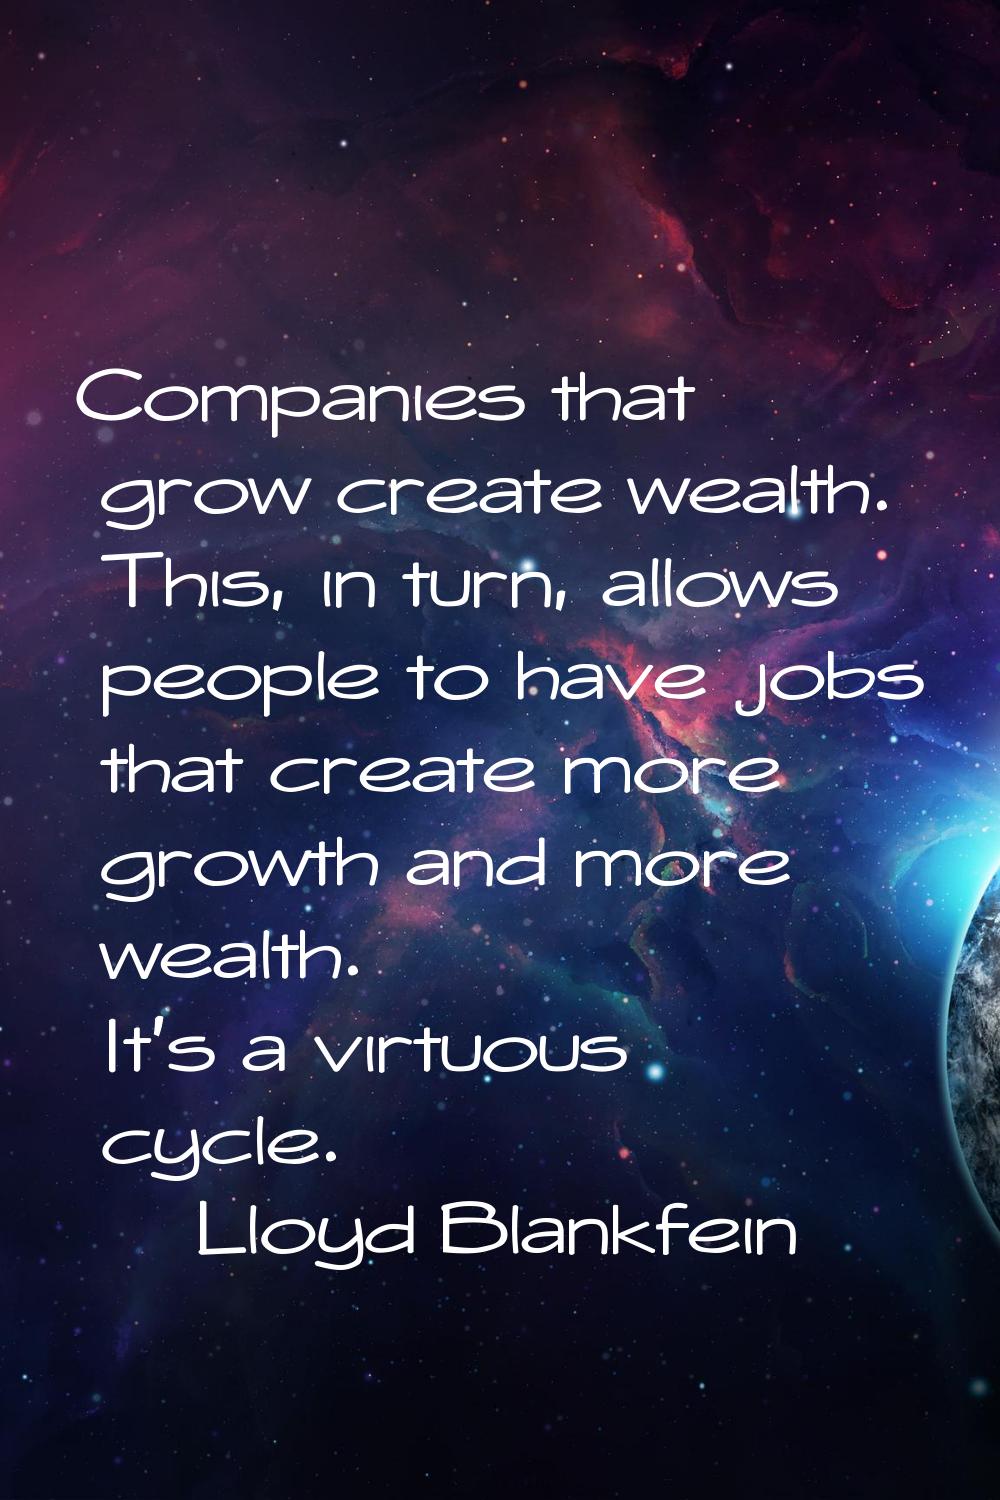 Companies that grow create wealth. This, in turn, allows people to have jobs that create more growt